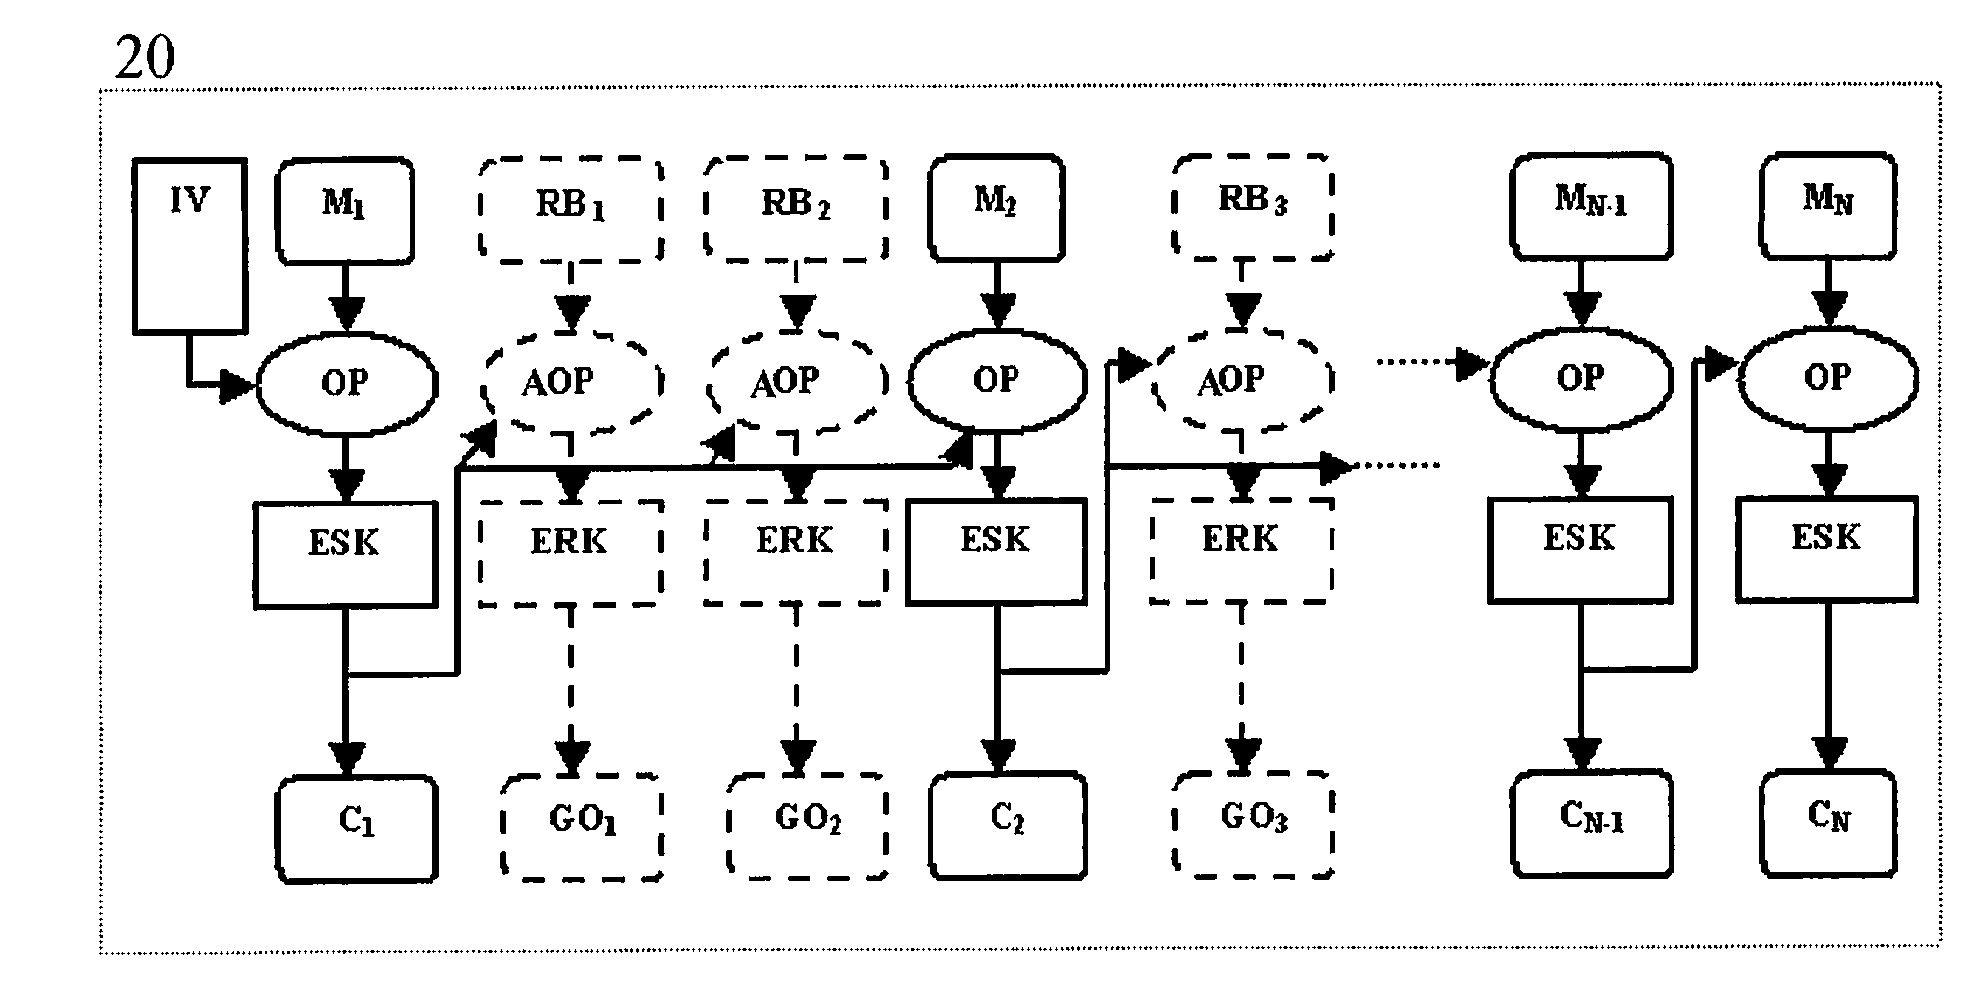 Method for Protecting IC Cards Against Power Analysis Attacks